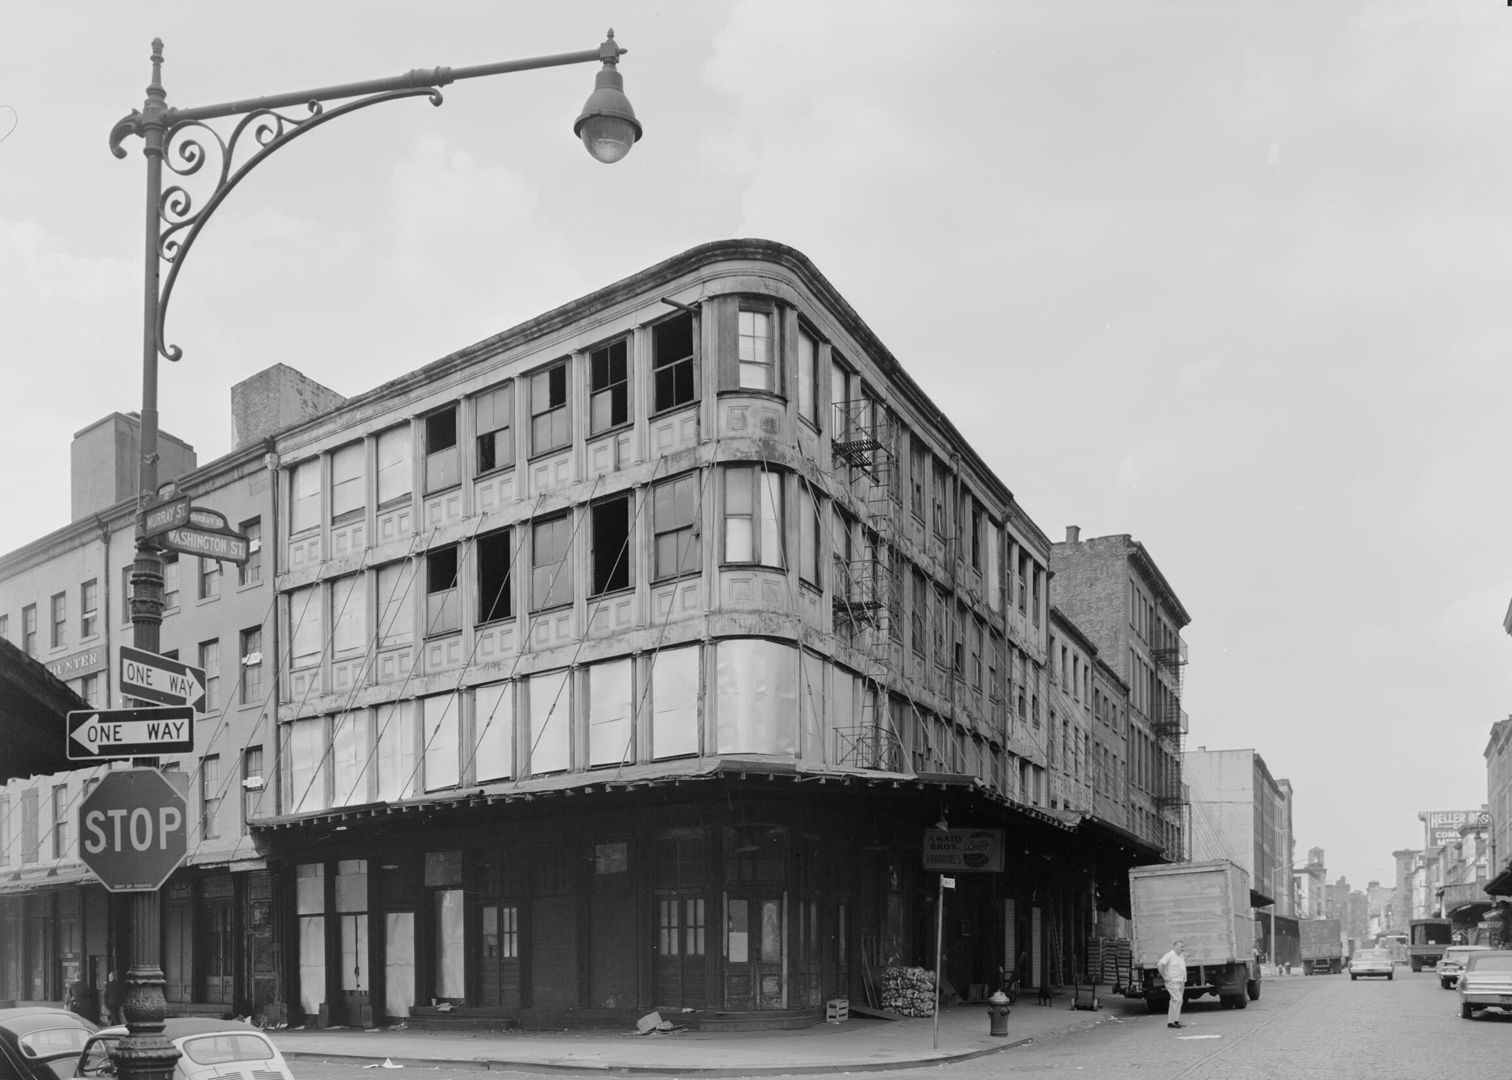 An old photo of a cast-iron building